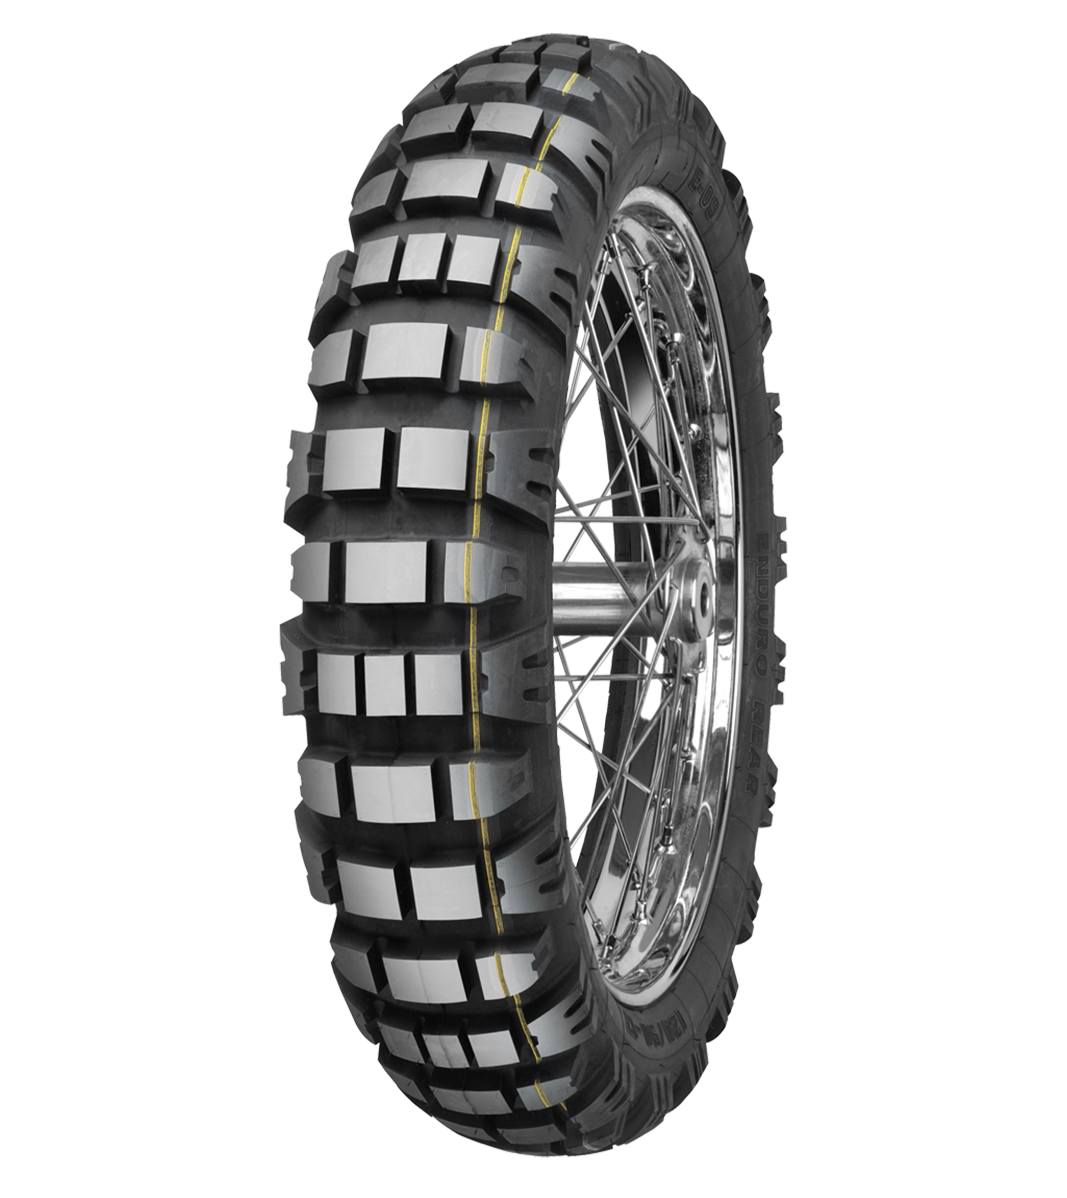 Mitas E-09 ENDURO 150/70-17 Trail OFF Trail DAKAR 69R Yellow Tubeless Rear Tire, 224048, 150/70-17, Adventure Touring, E Series, E-09 Enduro, Rear, Trail, Trail OFF, Tires - Imported and distributed in North &amp; South America by Lindeco Genuine Powersports - Premier Powersports Equipment and Accessories for Motorcycle Enthusiasts, Professional Riders and Dealers.